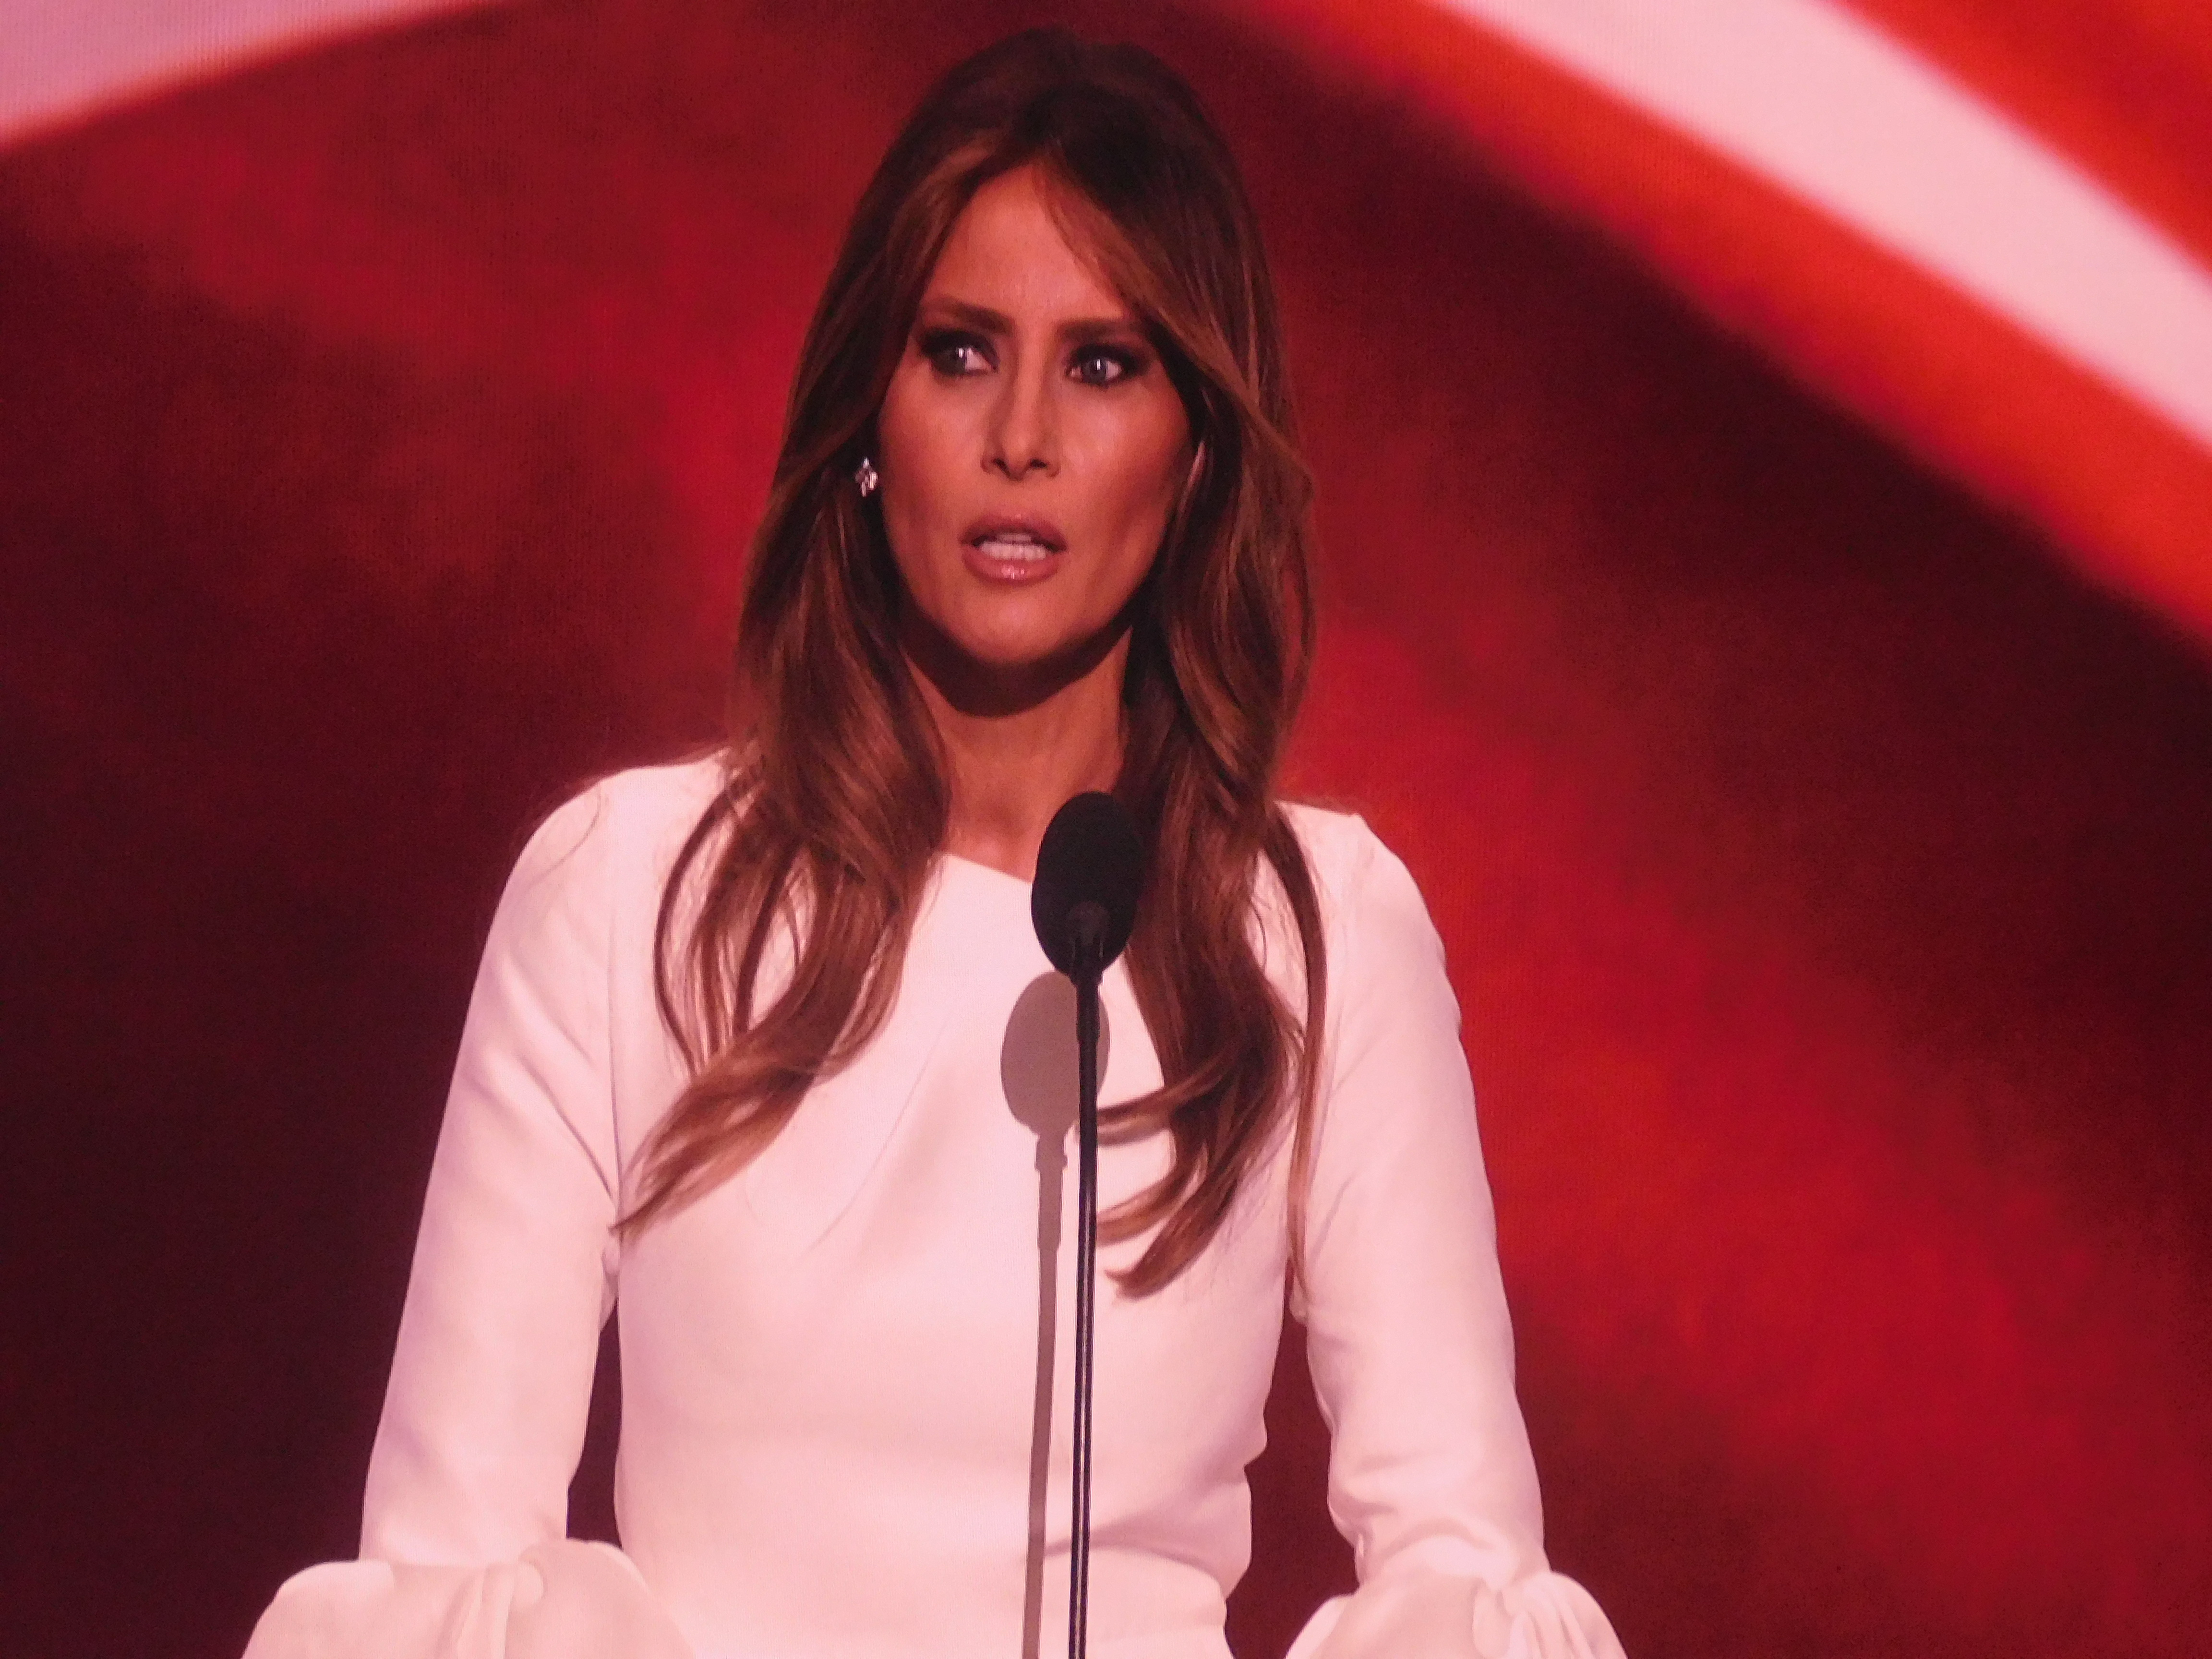 Trump introduced his wife Melania at the convention. 